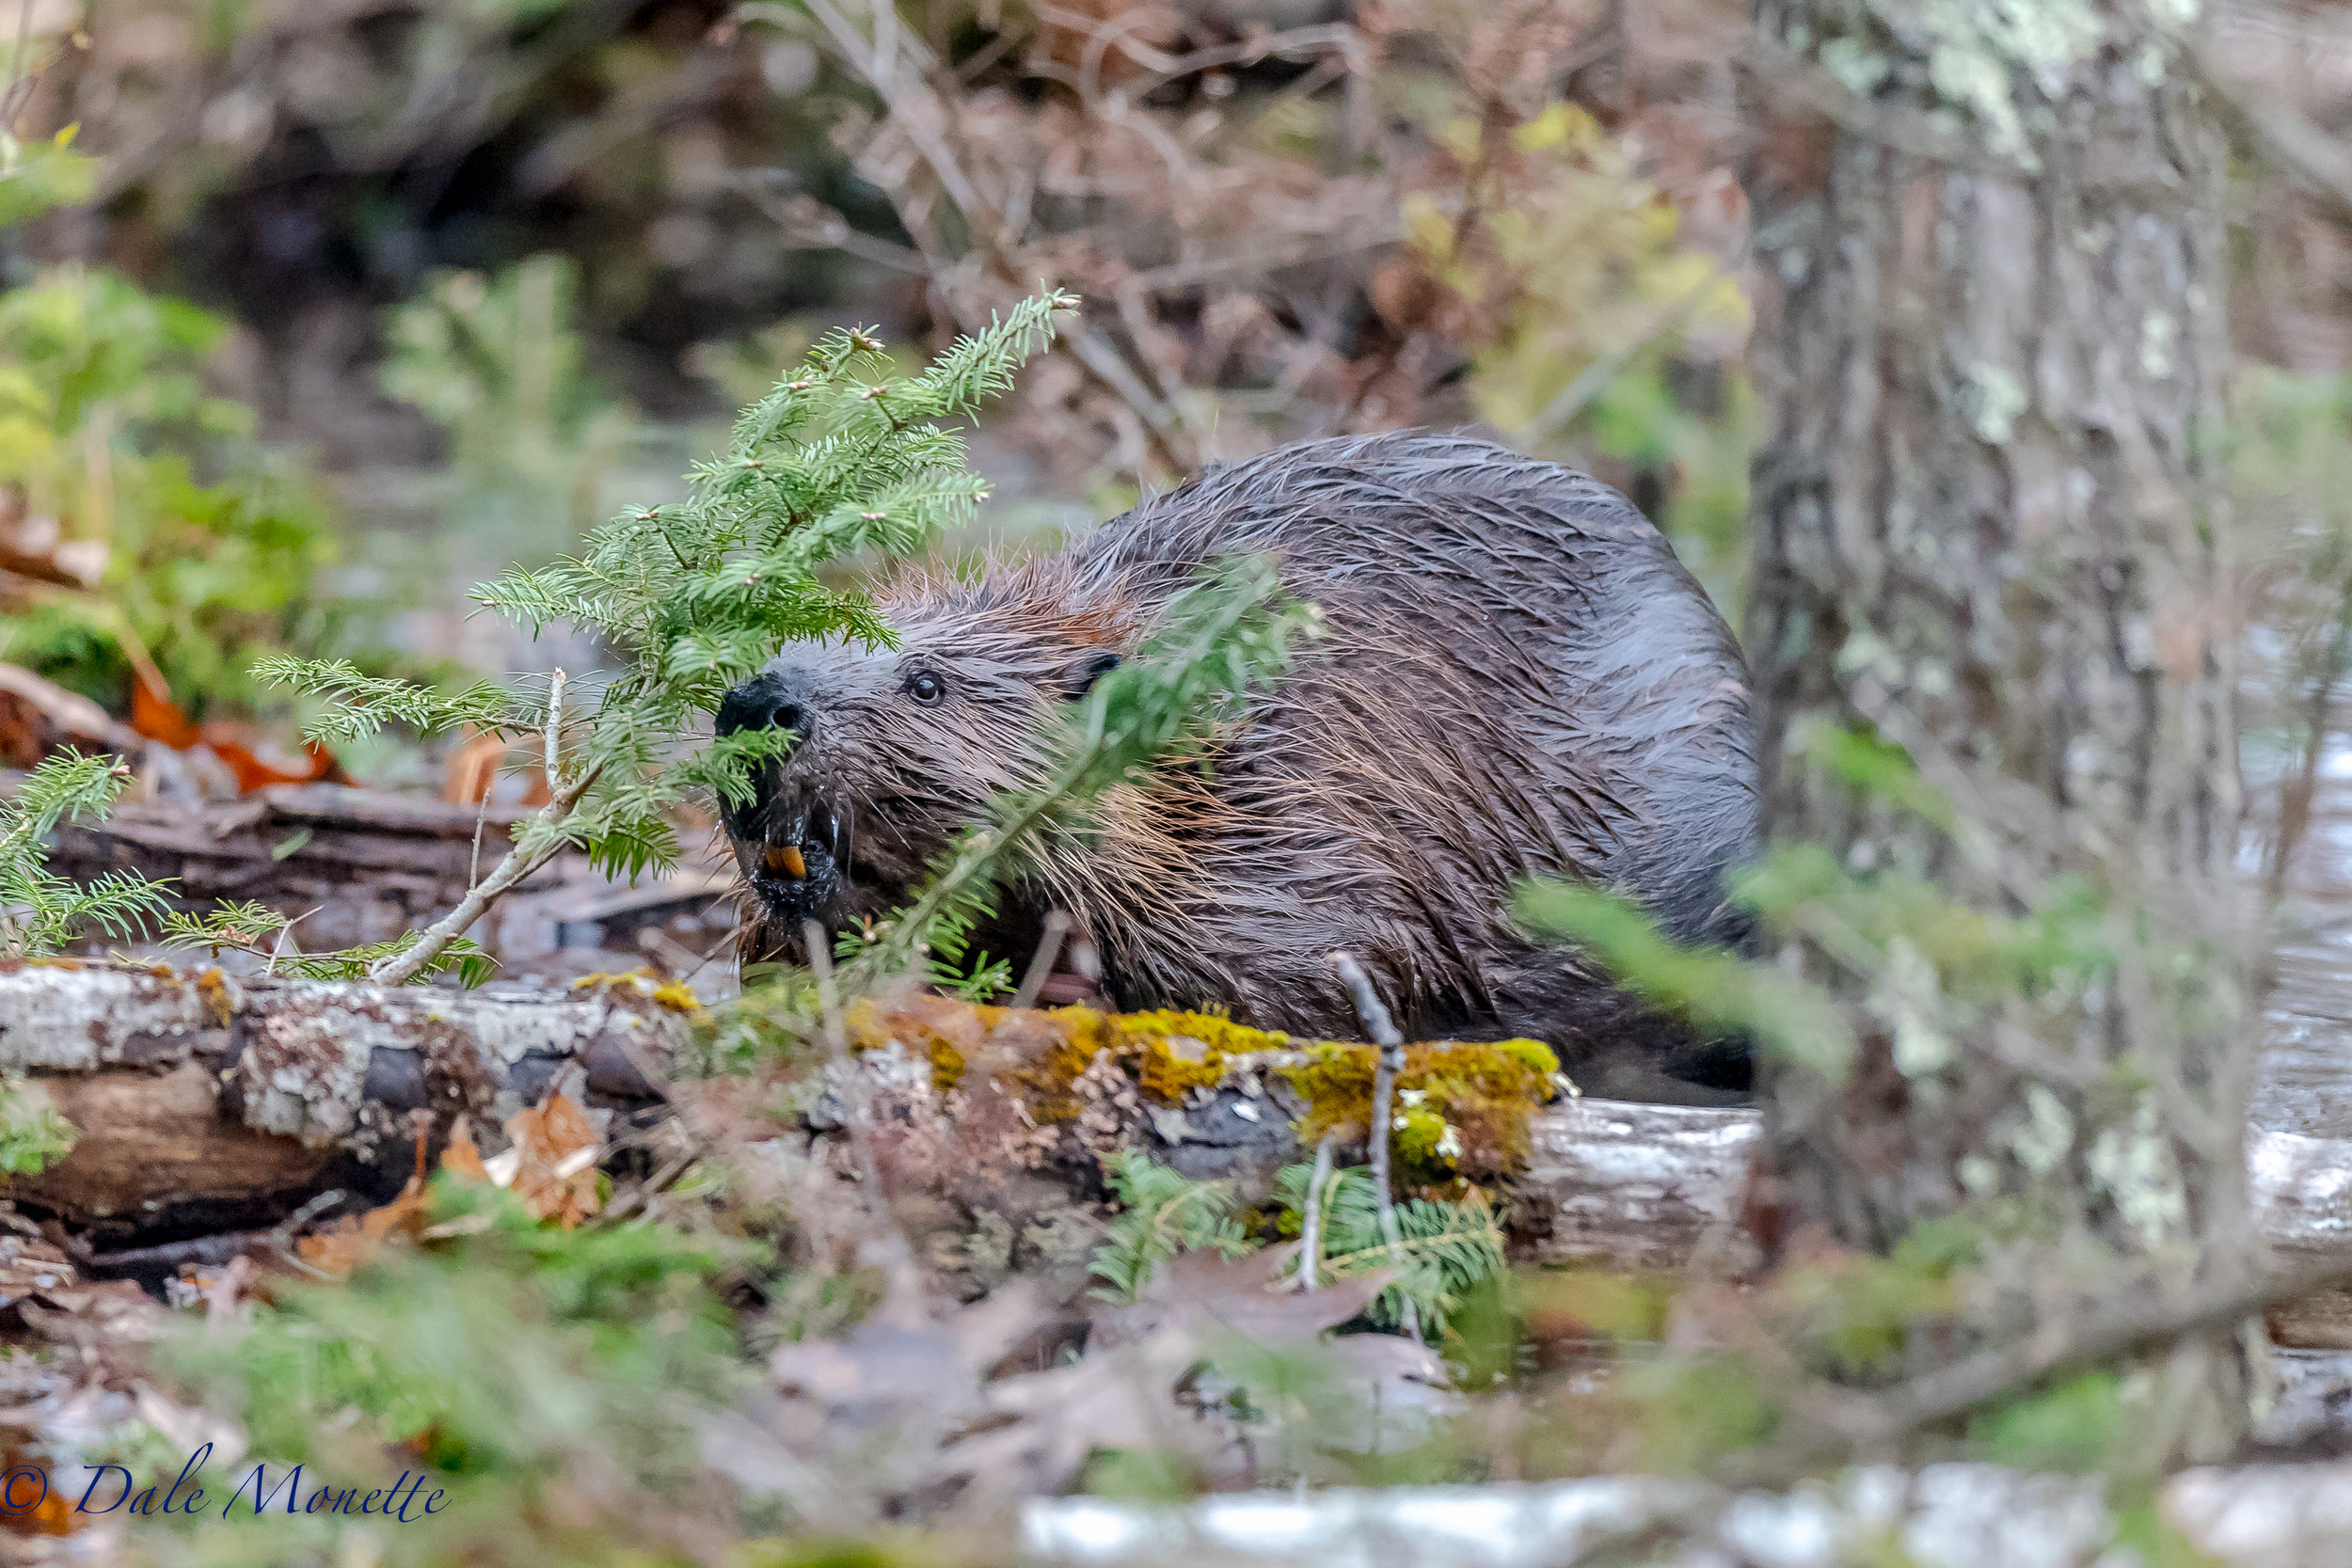   Note the teeth on this beaver. The teeth appear orange-yellow in color, because the thick enamel contains iron deposits which keep the enamel strong. This guy was eating spruce shoots along a pond side at Quabbin. &nbsp;5/2/17  